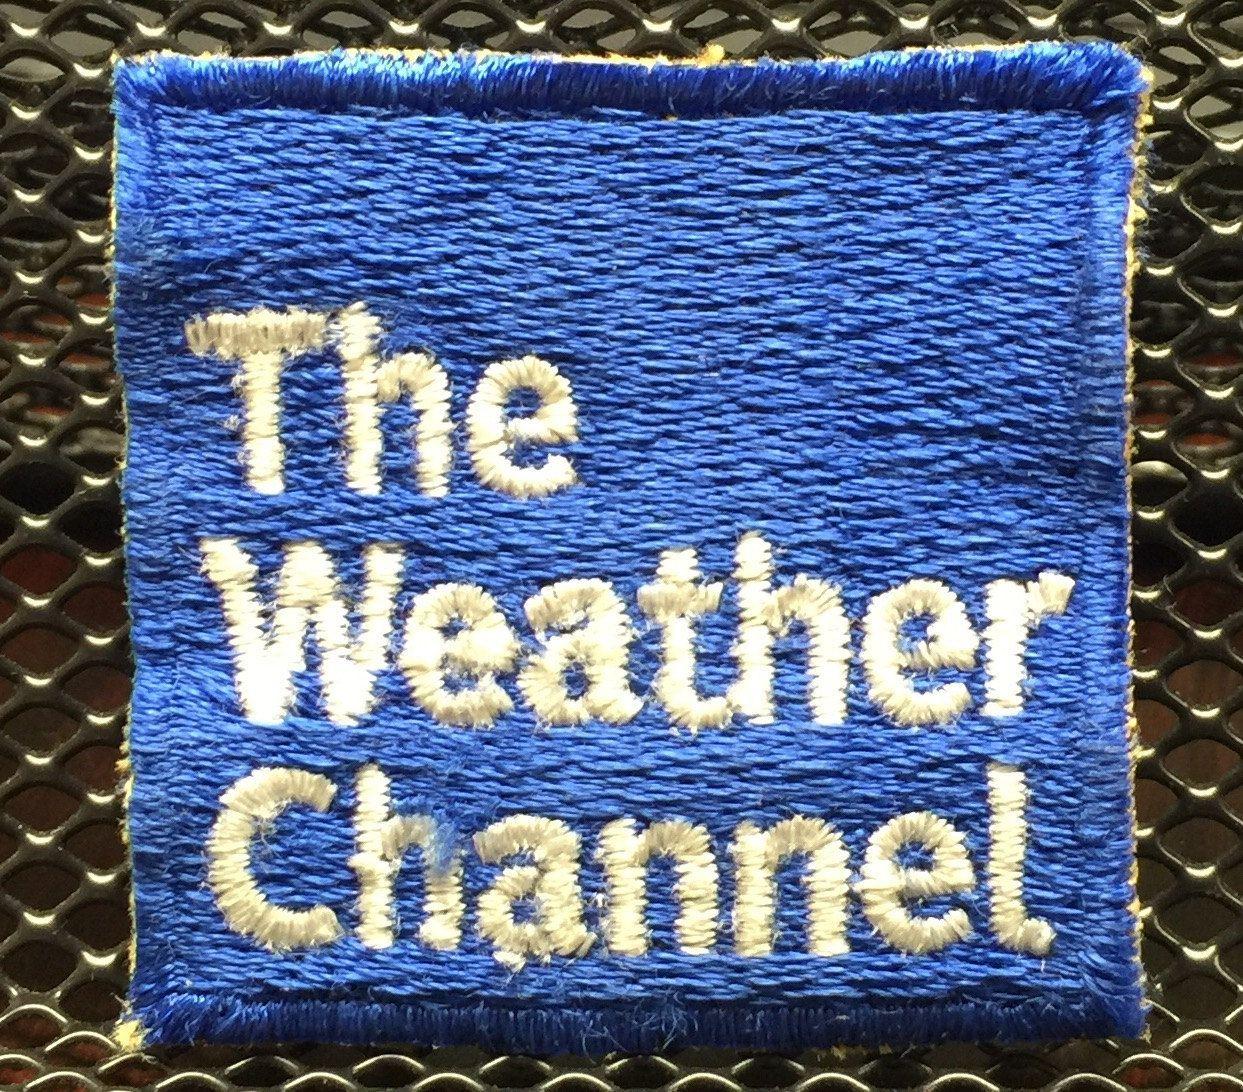 The Weather Channel Logo - The Weather Channel Embroidered Patch | Etsy Store | Weather ...